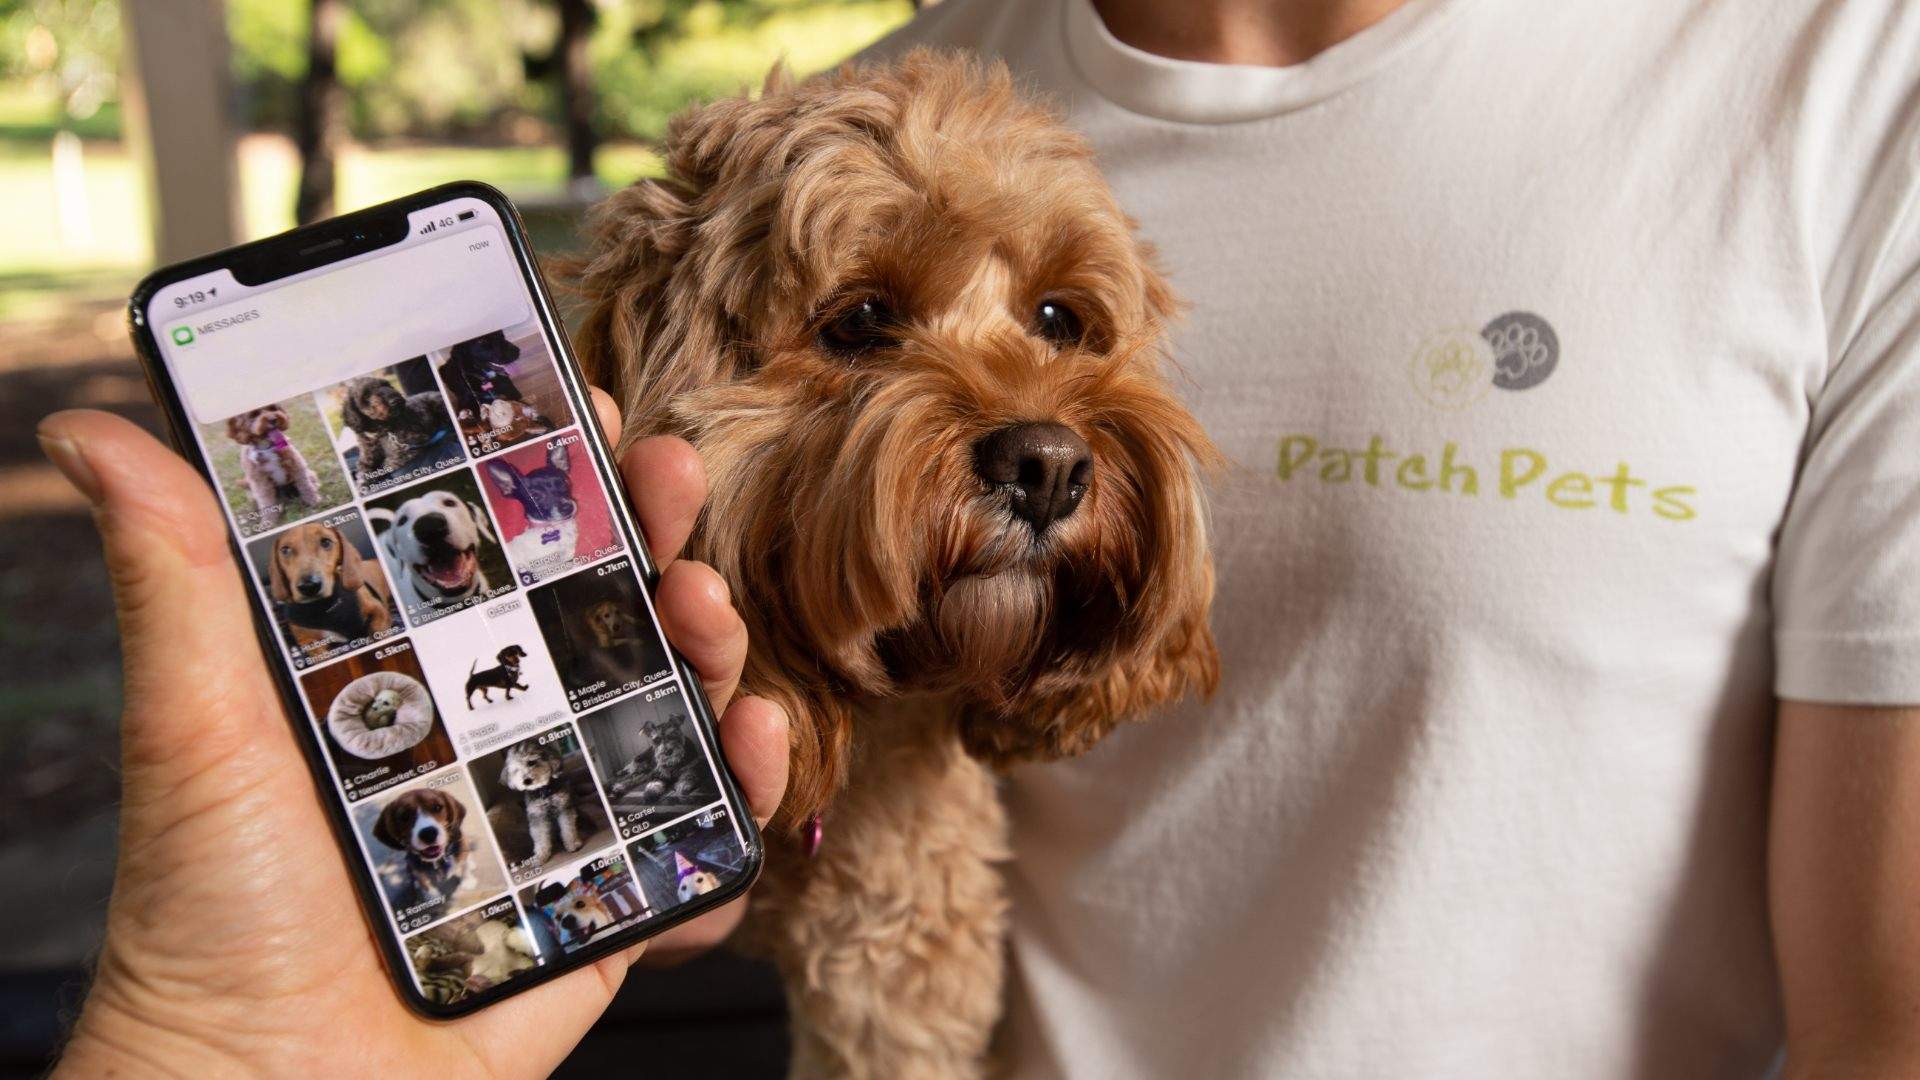 PatchPets Is the New Tinder-Style App That'll Help Your Dog Make Four-Legged Friends